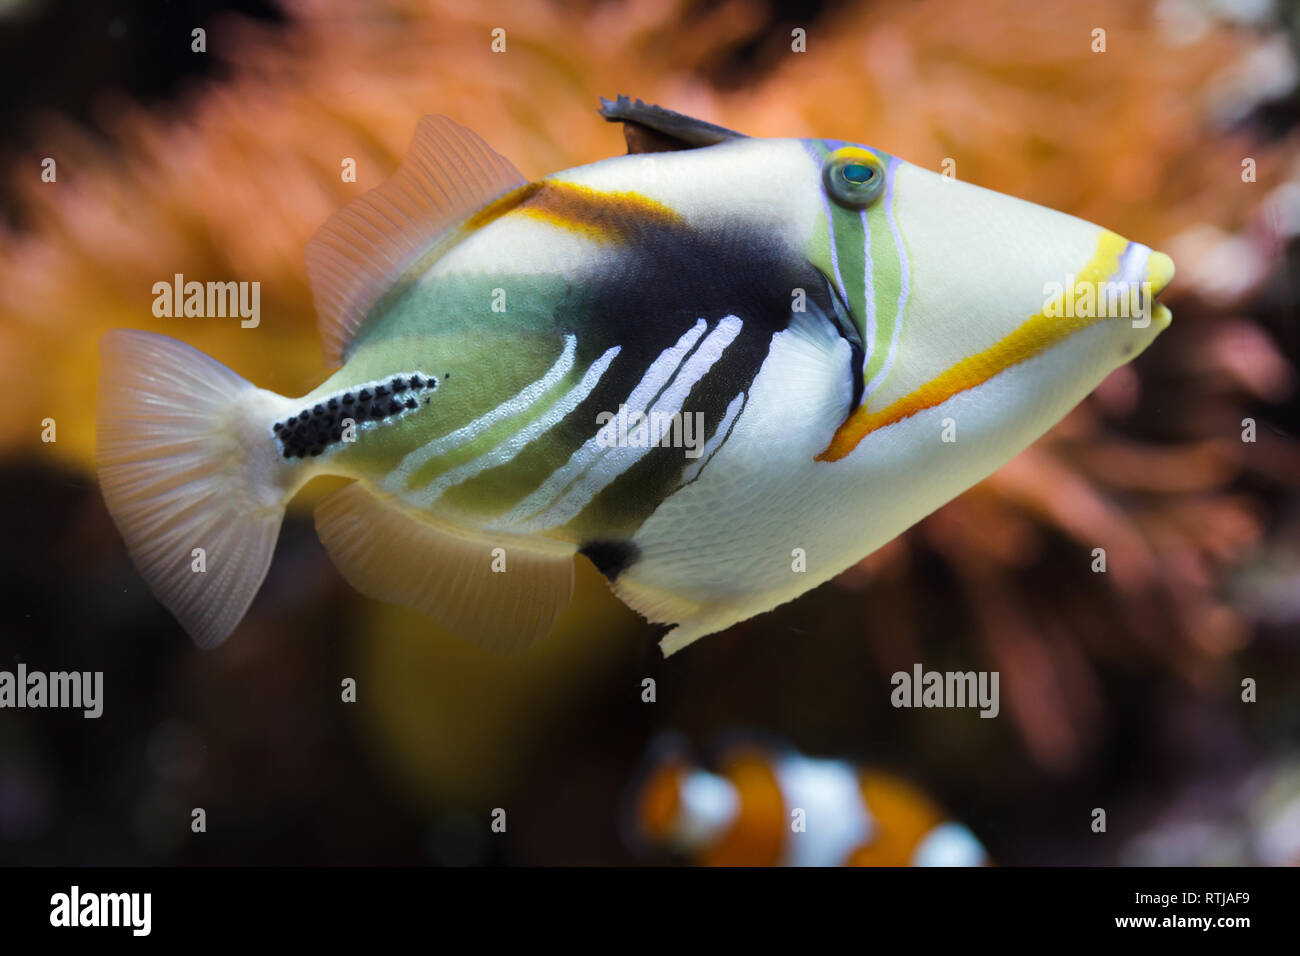 Lagoon triggerfish (Rhinecanthus aculeatus), also known as the Picasso triggerfish. Stock Photo